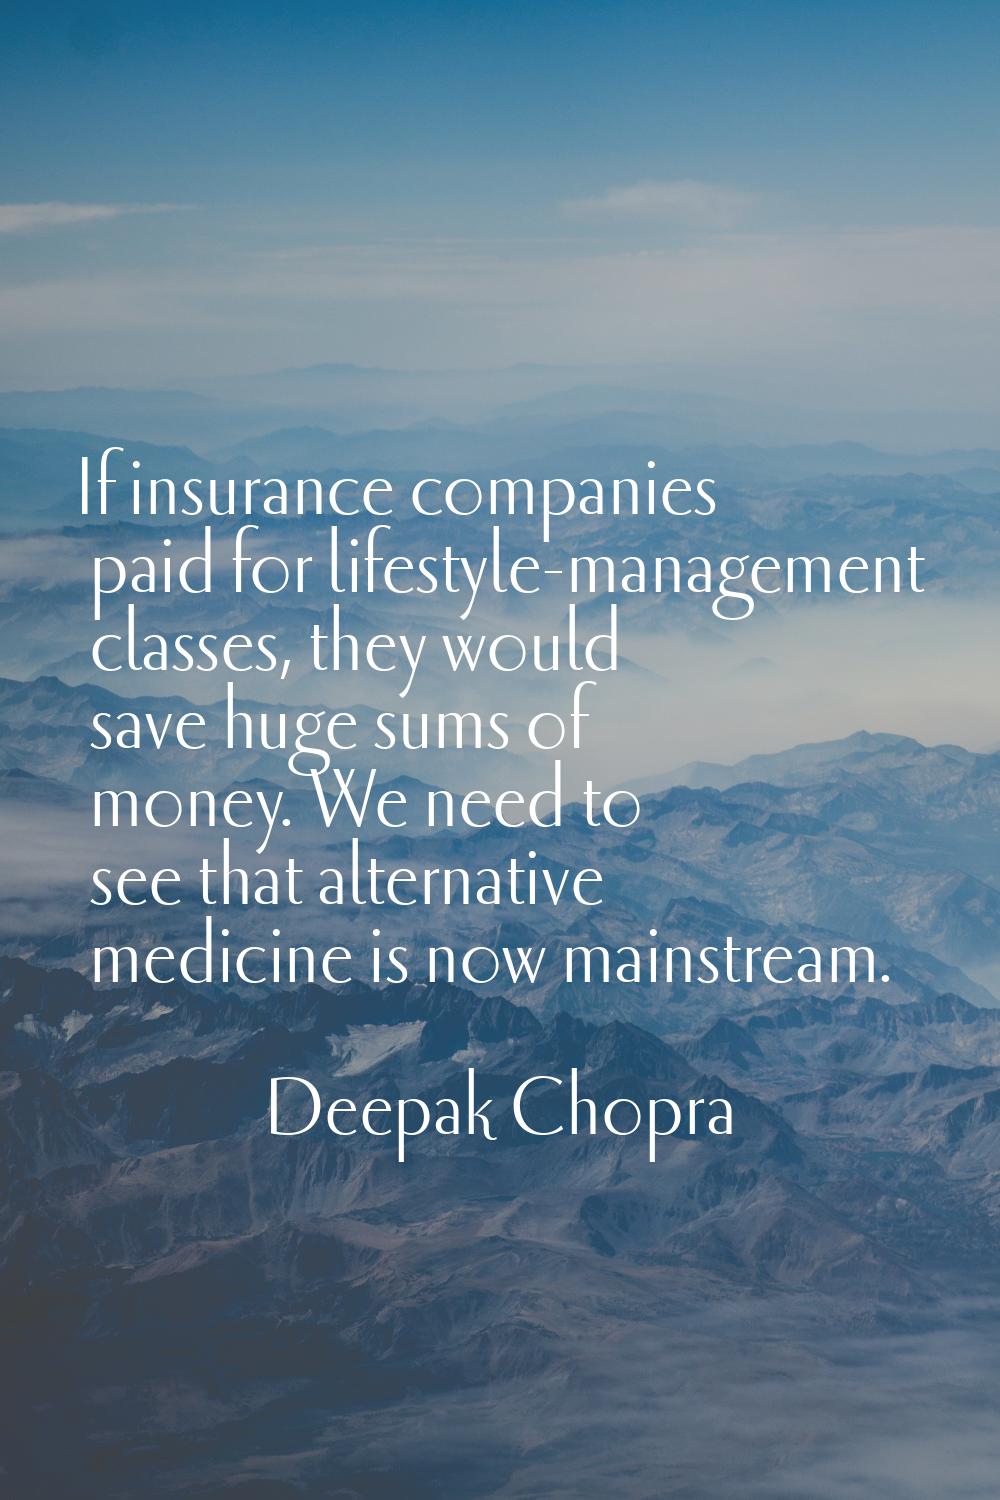 If insurance companies paid for lifestyle-management classes, they would save huge sums of money. W